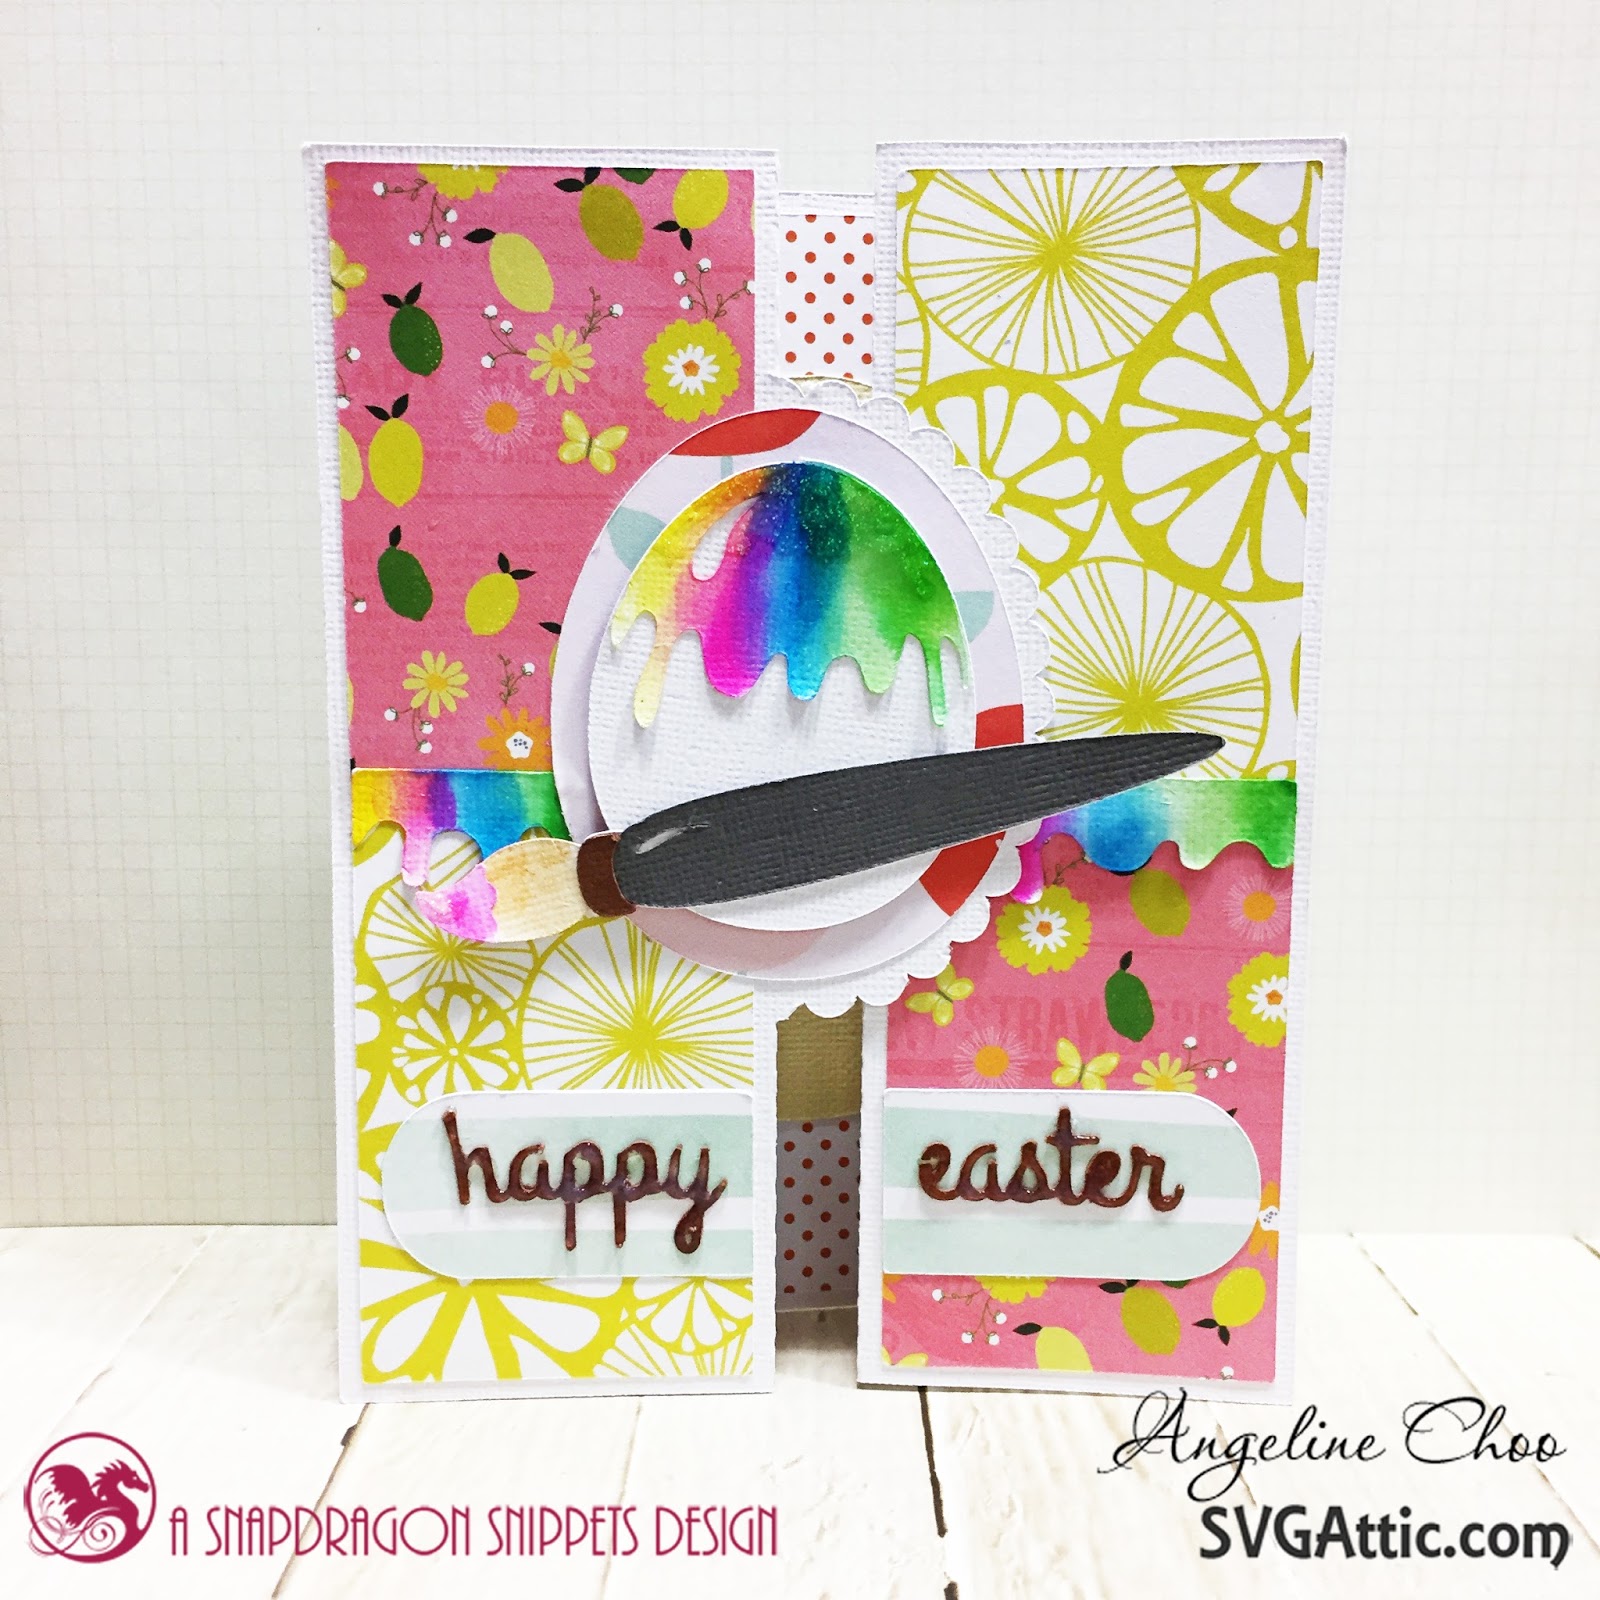 SVG Attic Blog Happy Easter Card with Angeline